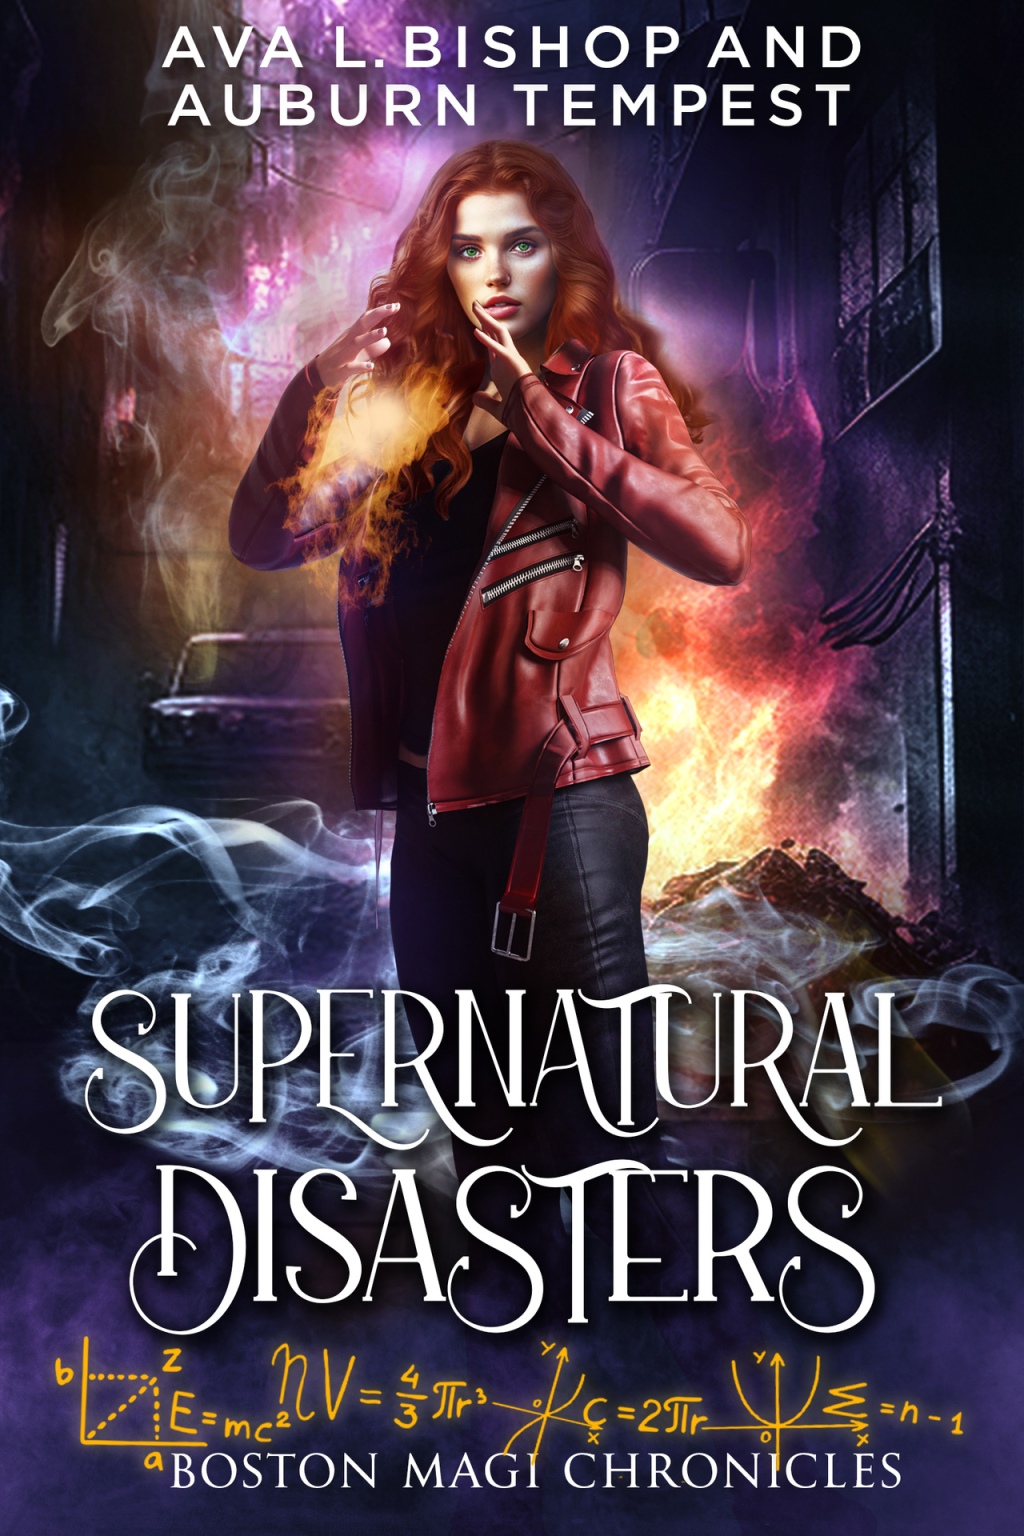 Supernatural Disasters – Another one goes into the dropped bin.